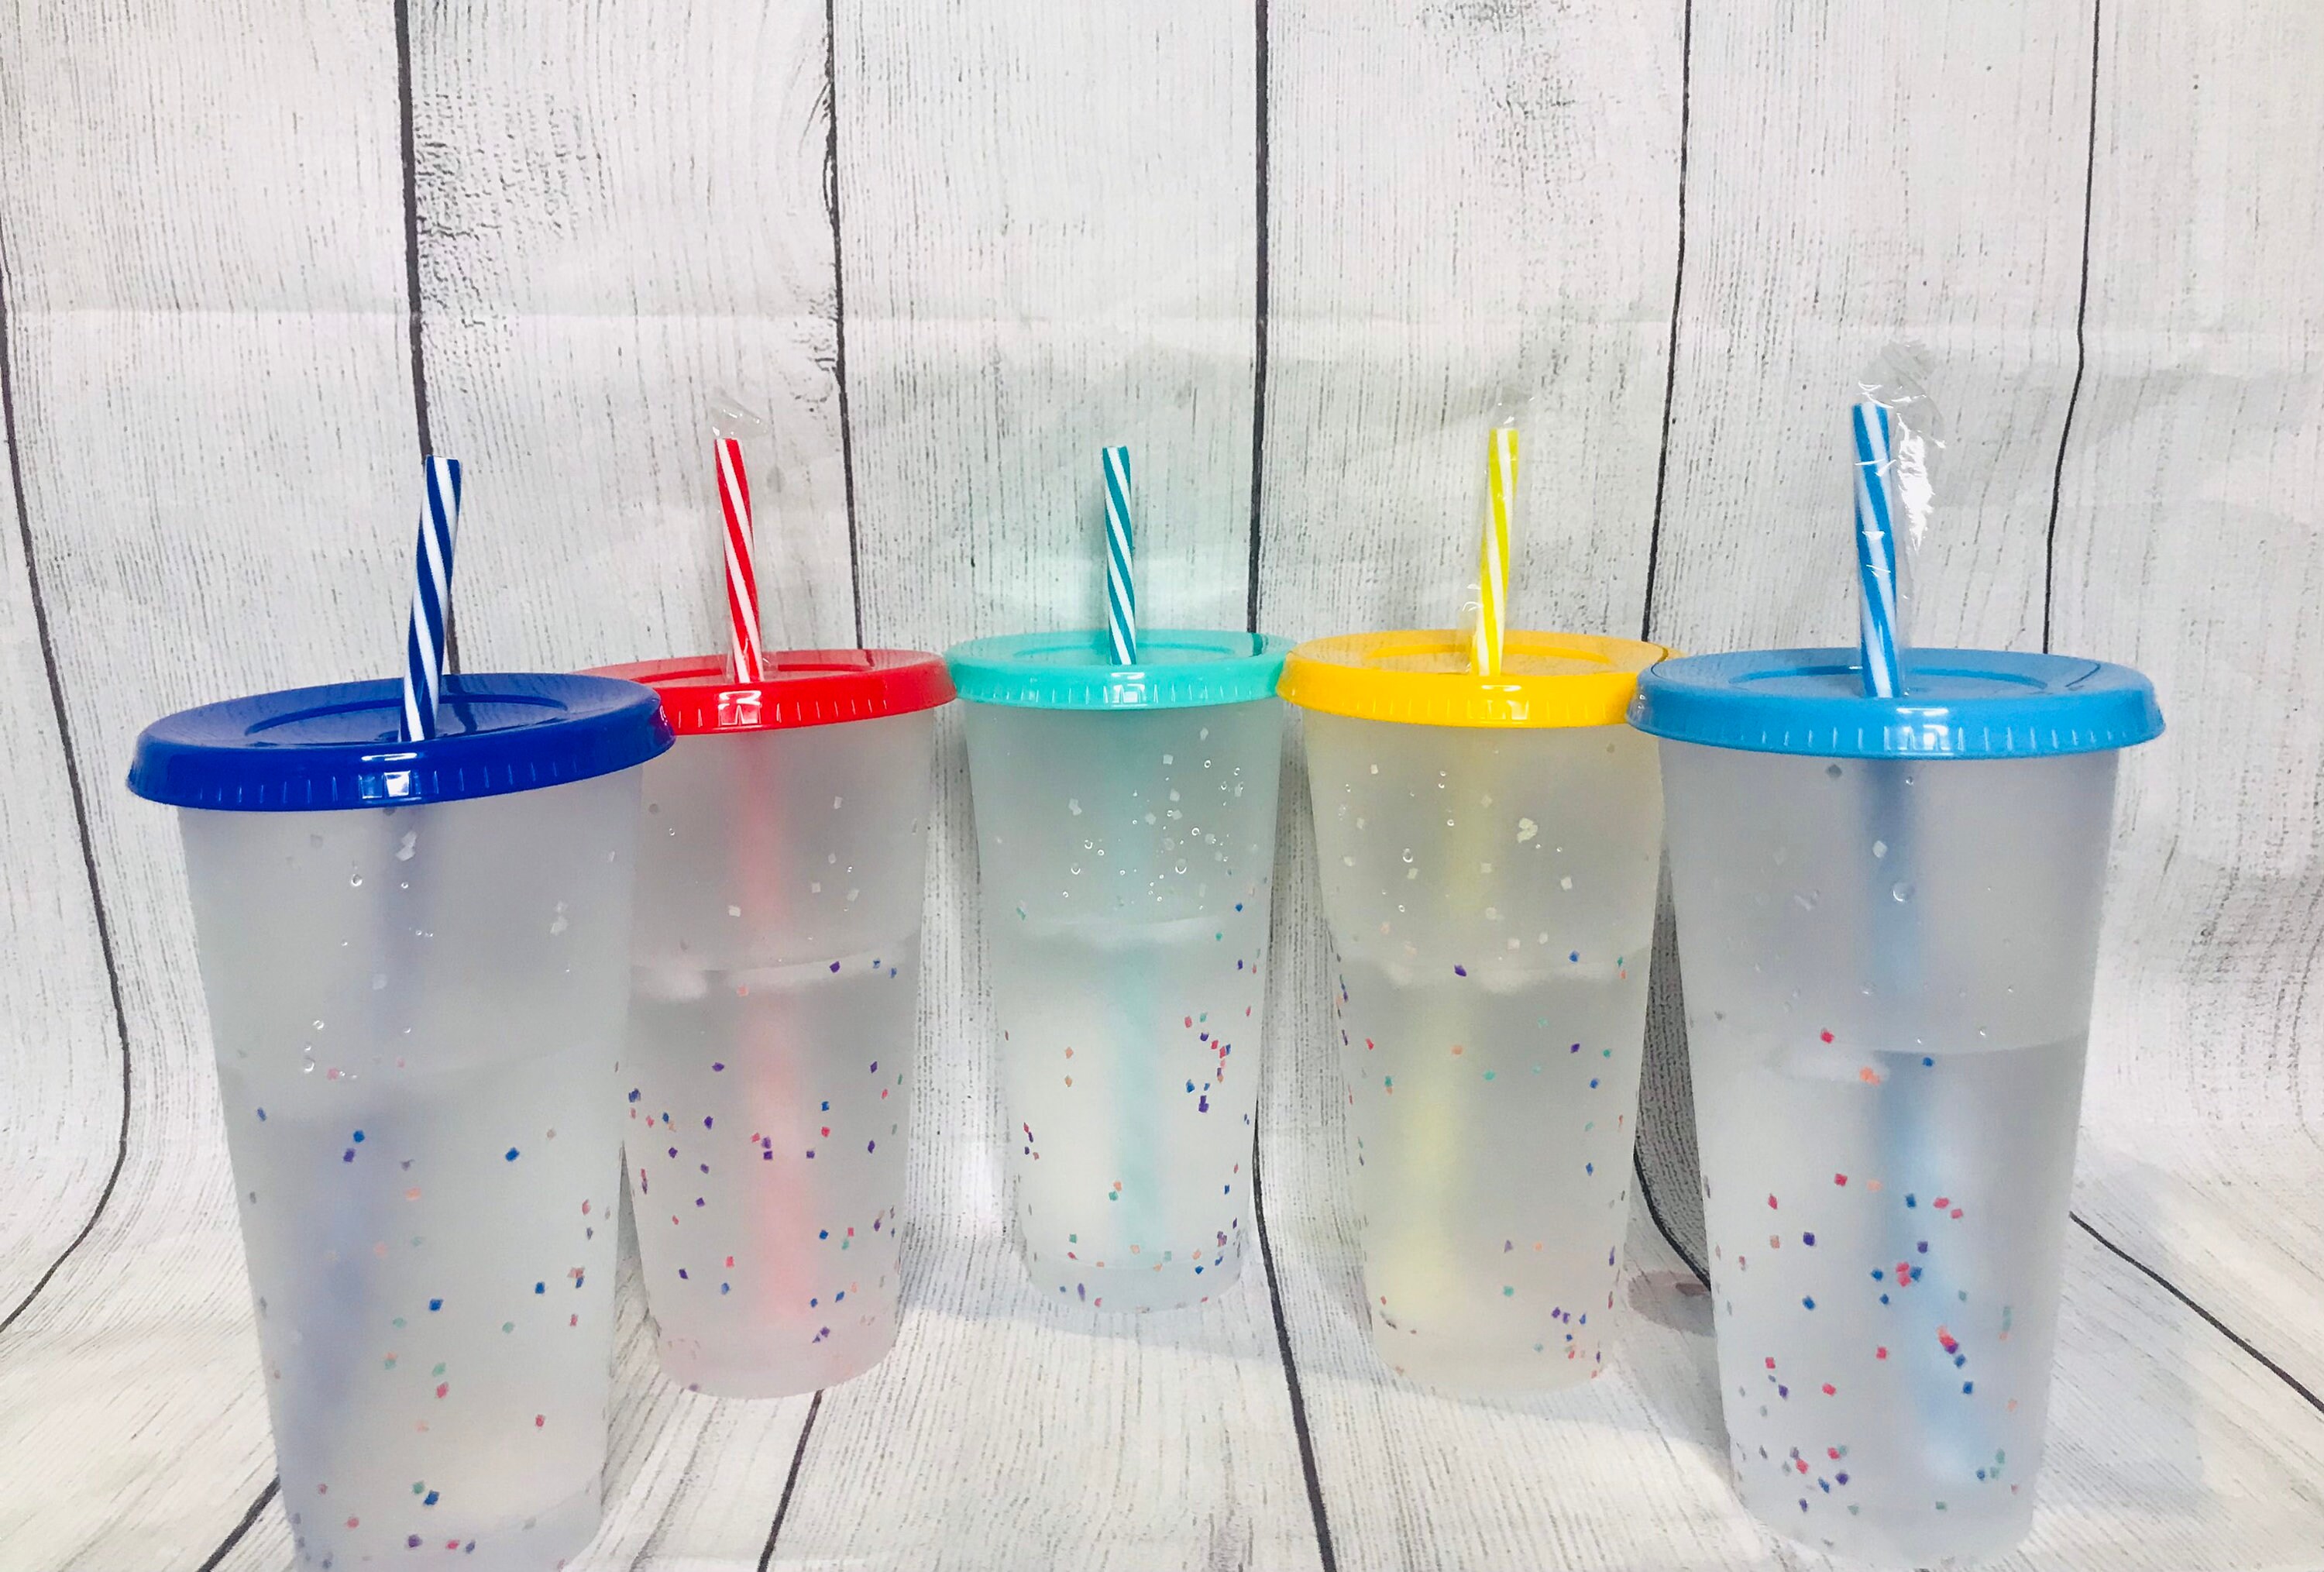 Color Changing Cups/confetti Cups/blank Cups/5pk Cups/bulk/blank